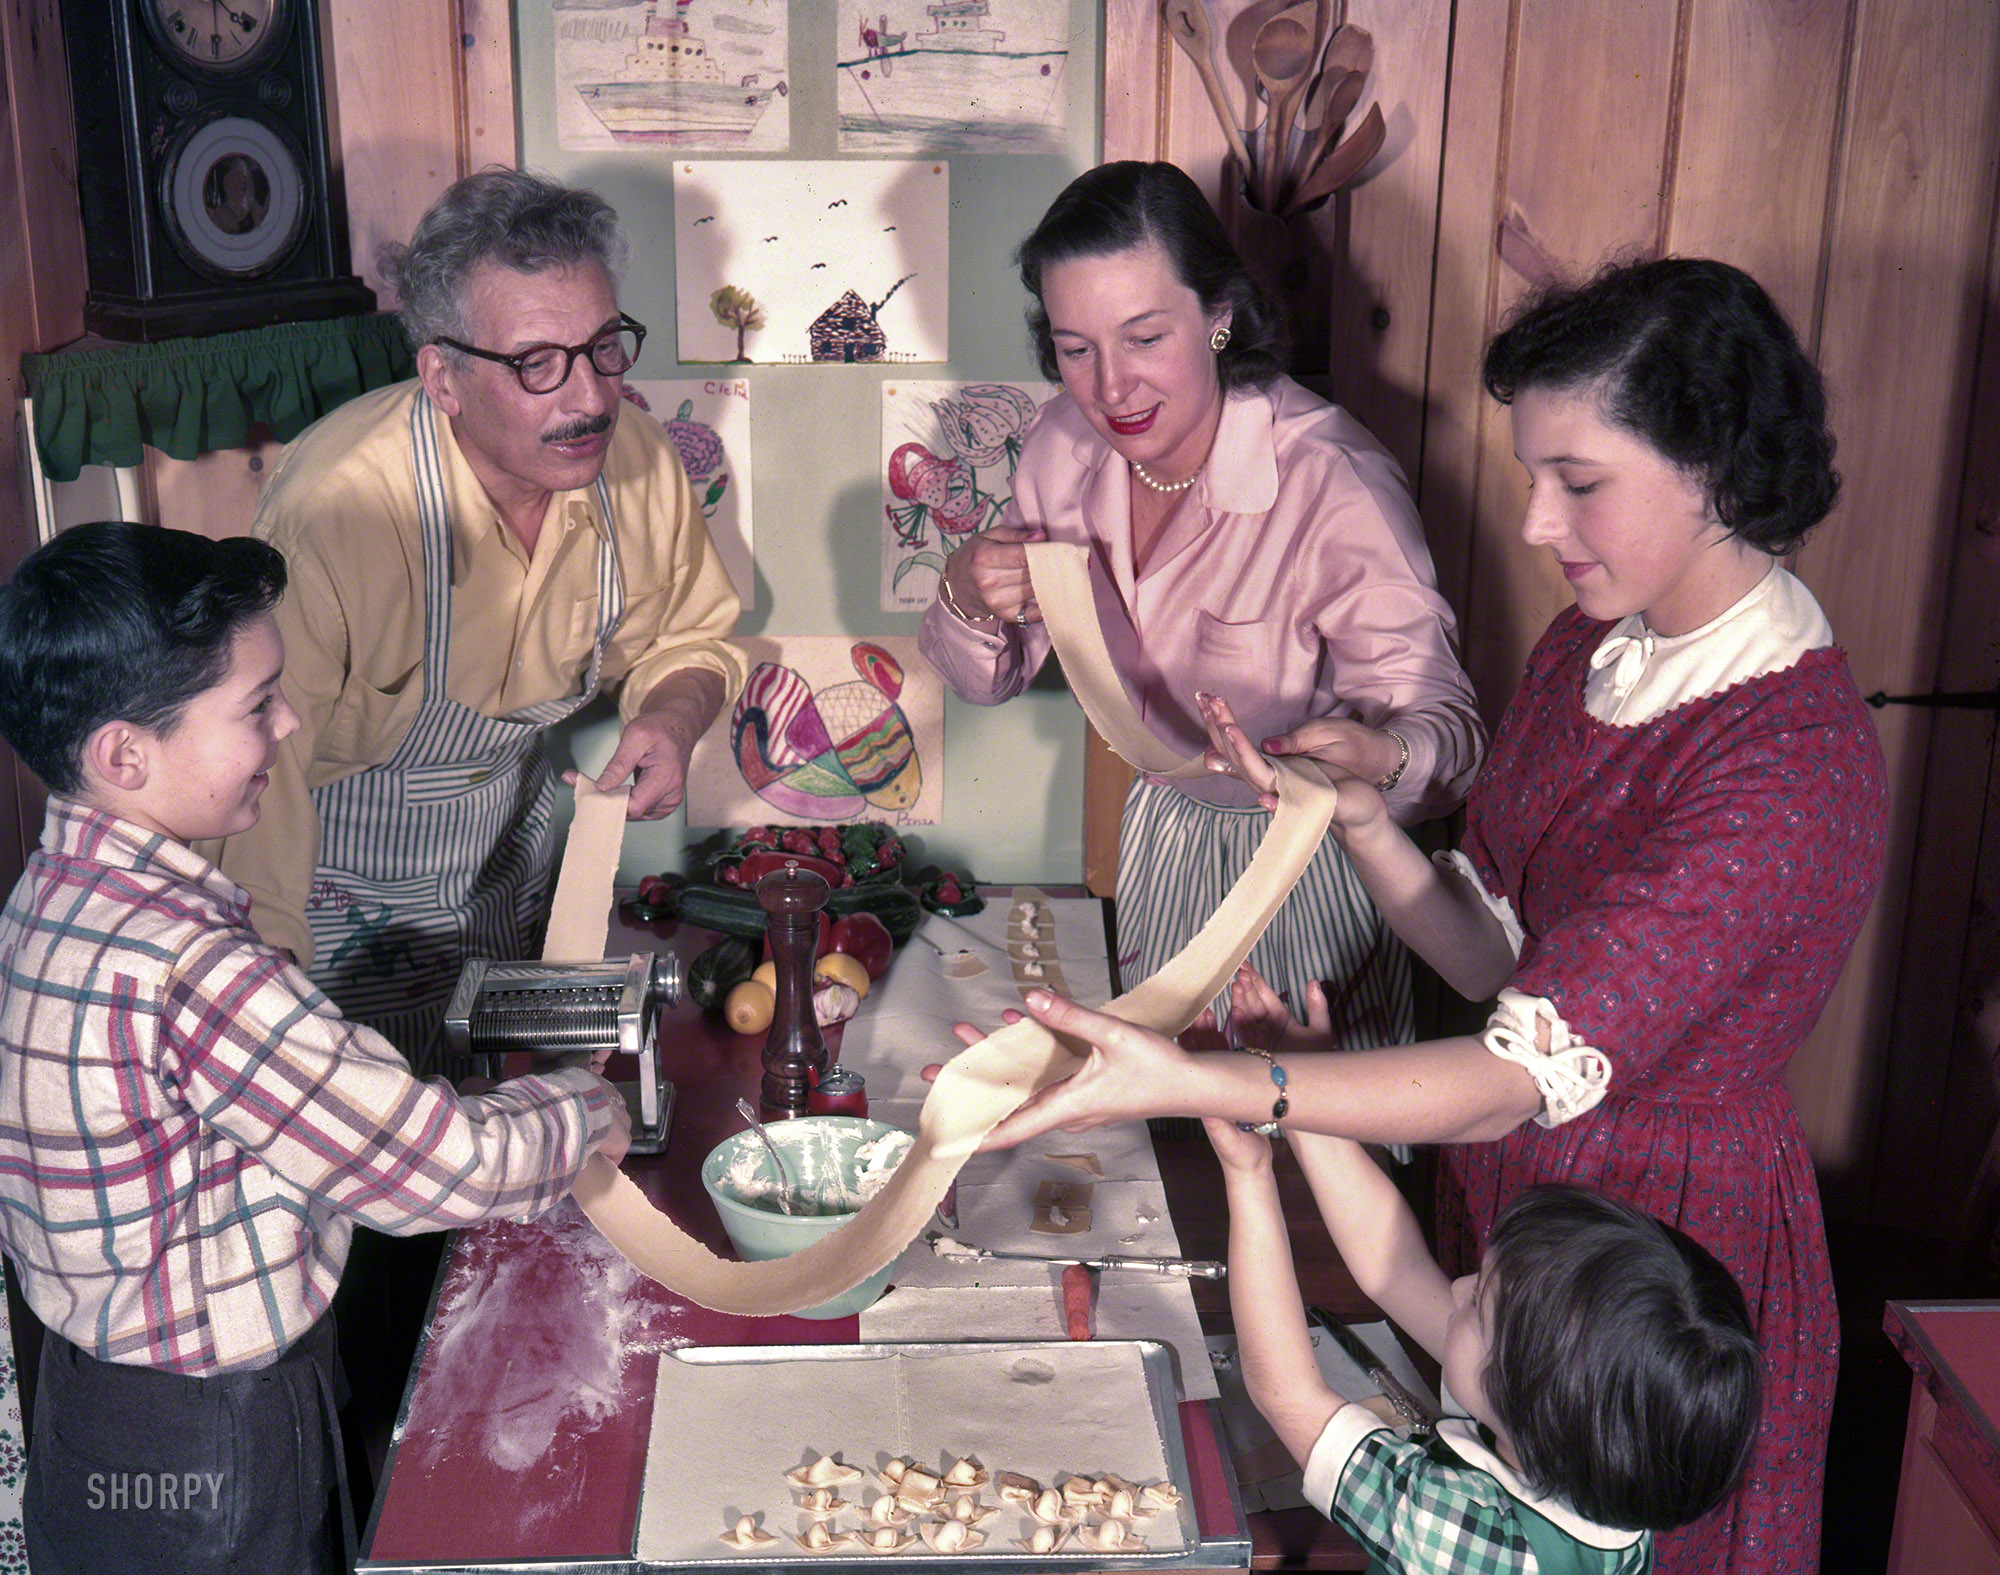 1955. "Opera singer Ezio Pinza and his wife Doris at home cooking a family meal with their children; the family enjoying a candlelit meal in their dining room. Includes the family making pasta." Photos by Kenneth Eide for the Look magazine article "Ezio Pinza's Old-Country Food Goes American." View full size.